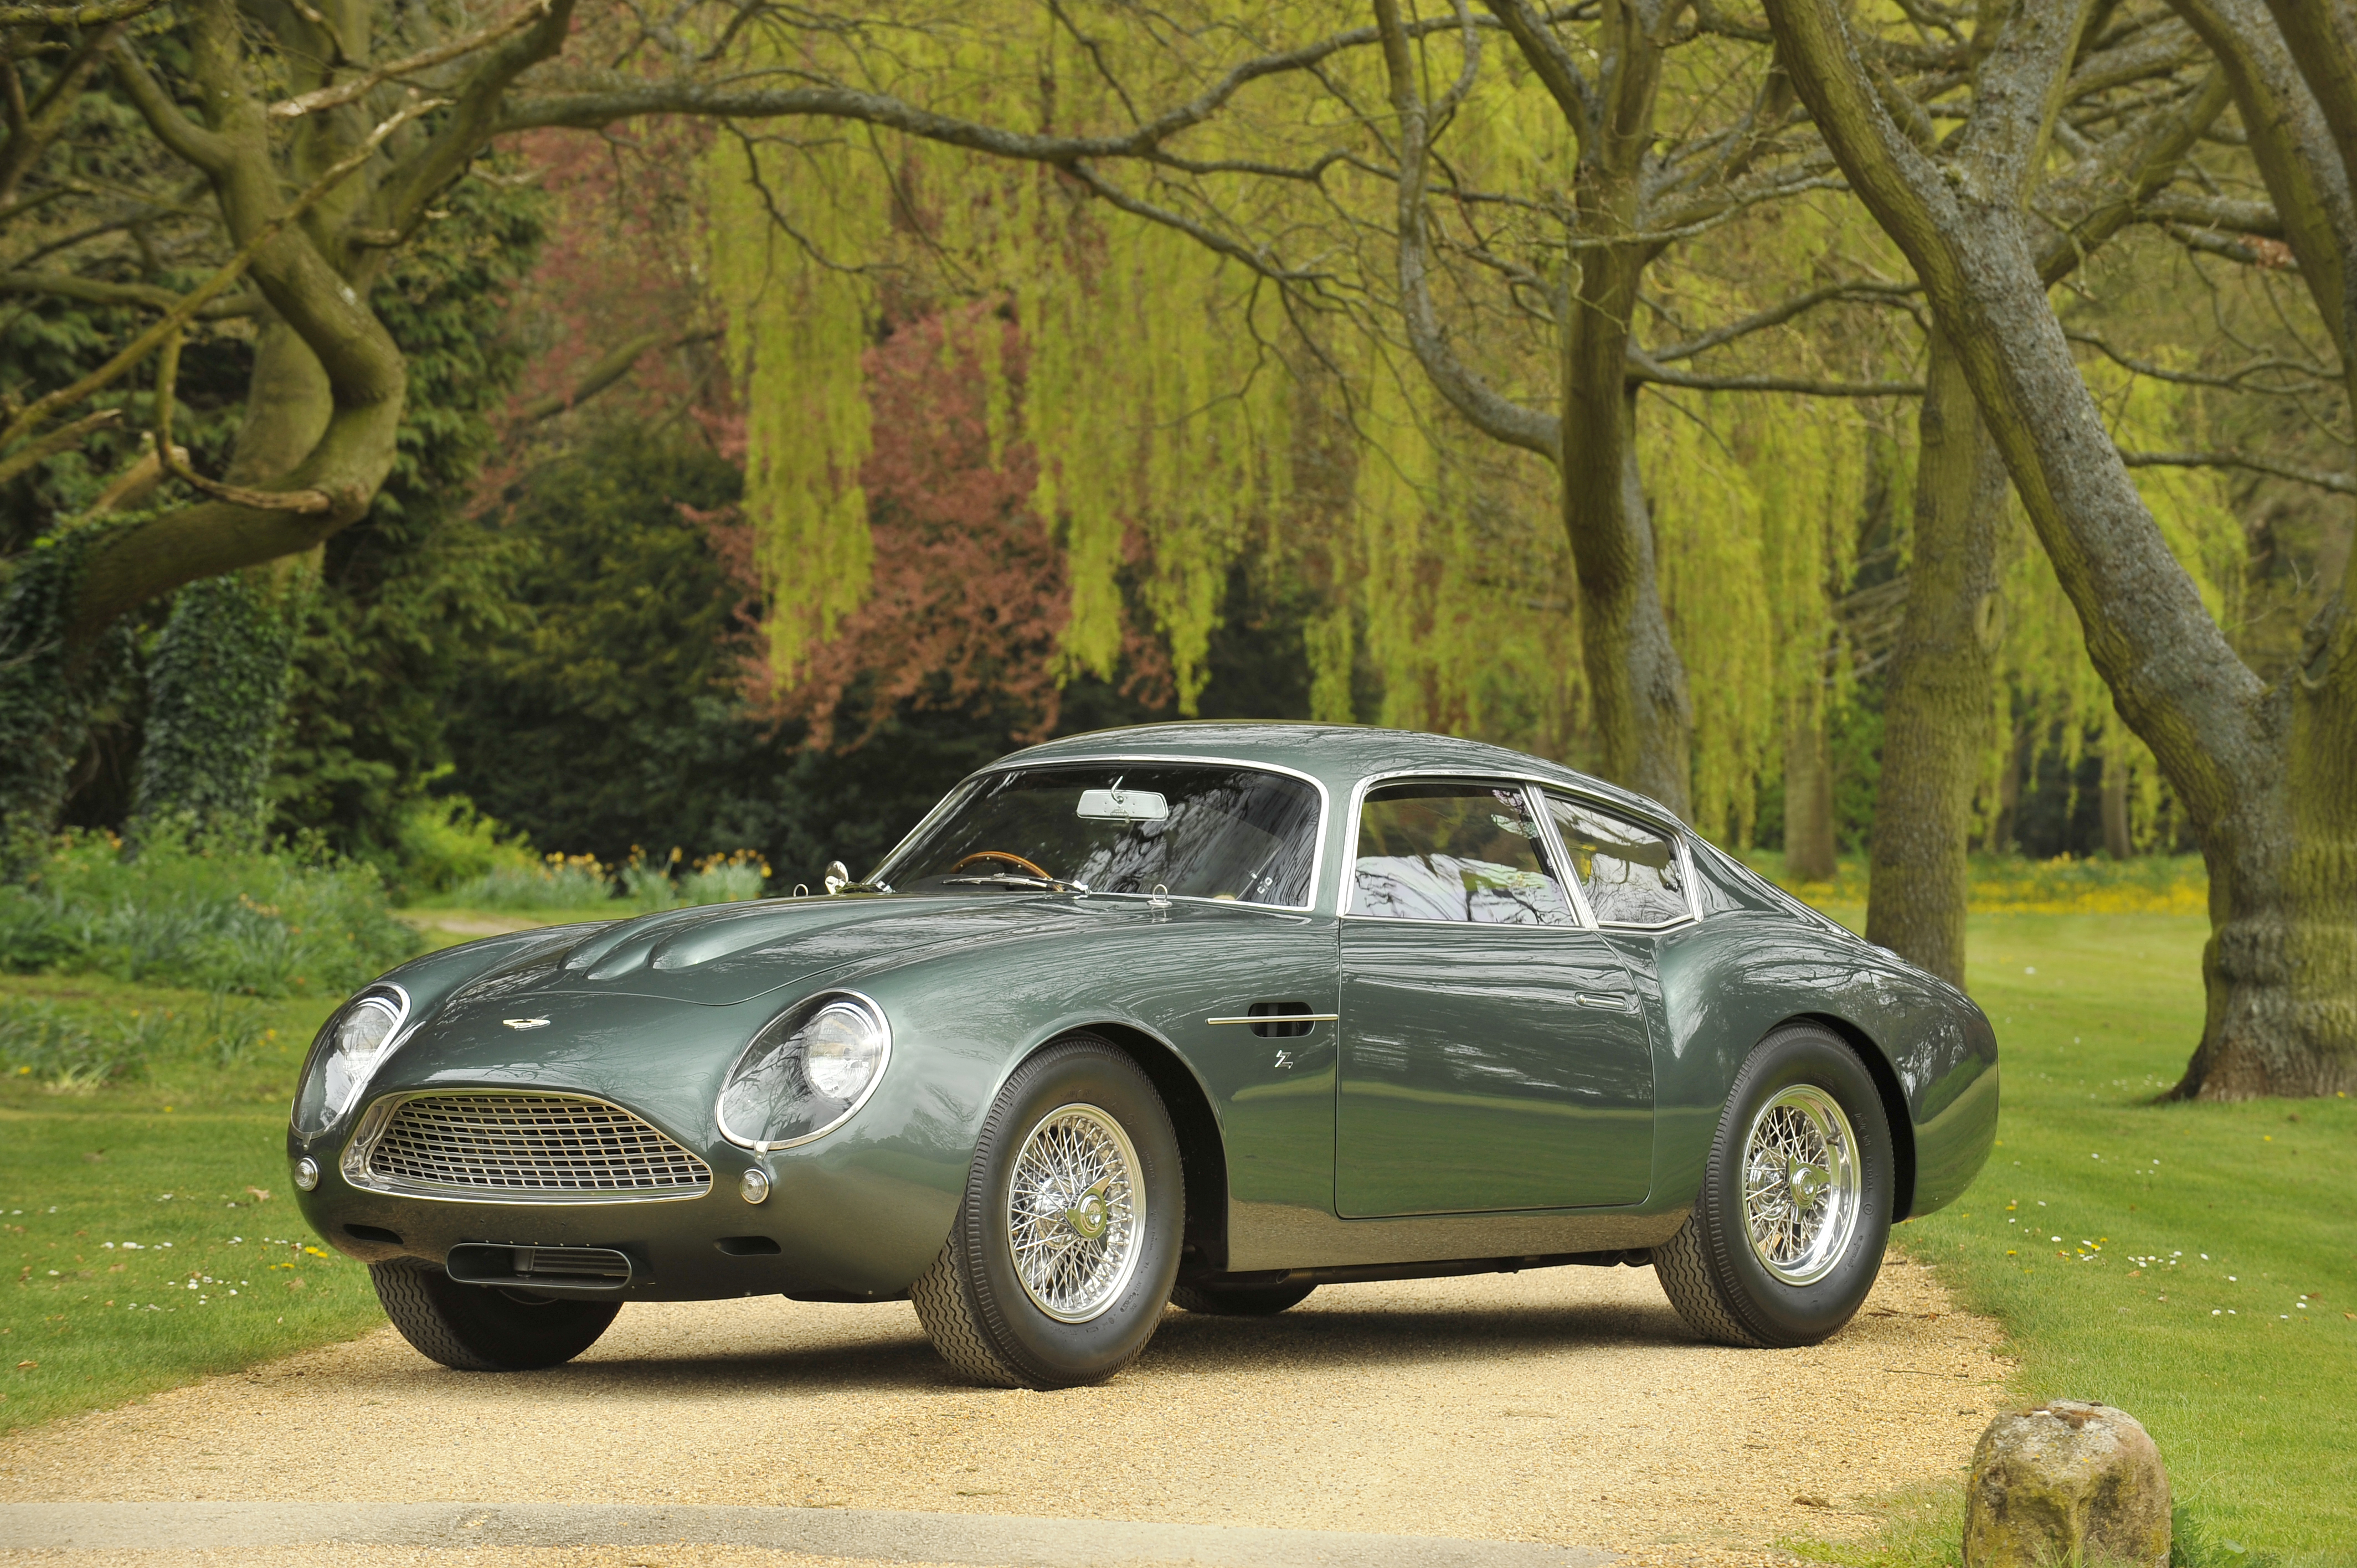 Motoring Heaven: Bonhams to offer 120 motor cars over this weekend at their Aston Martin and Spa Classic Auction Sales cover